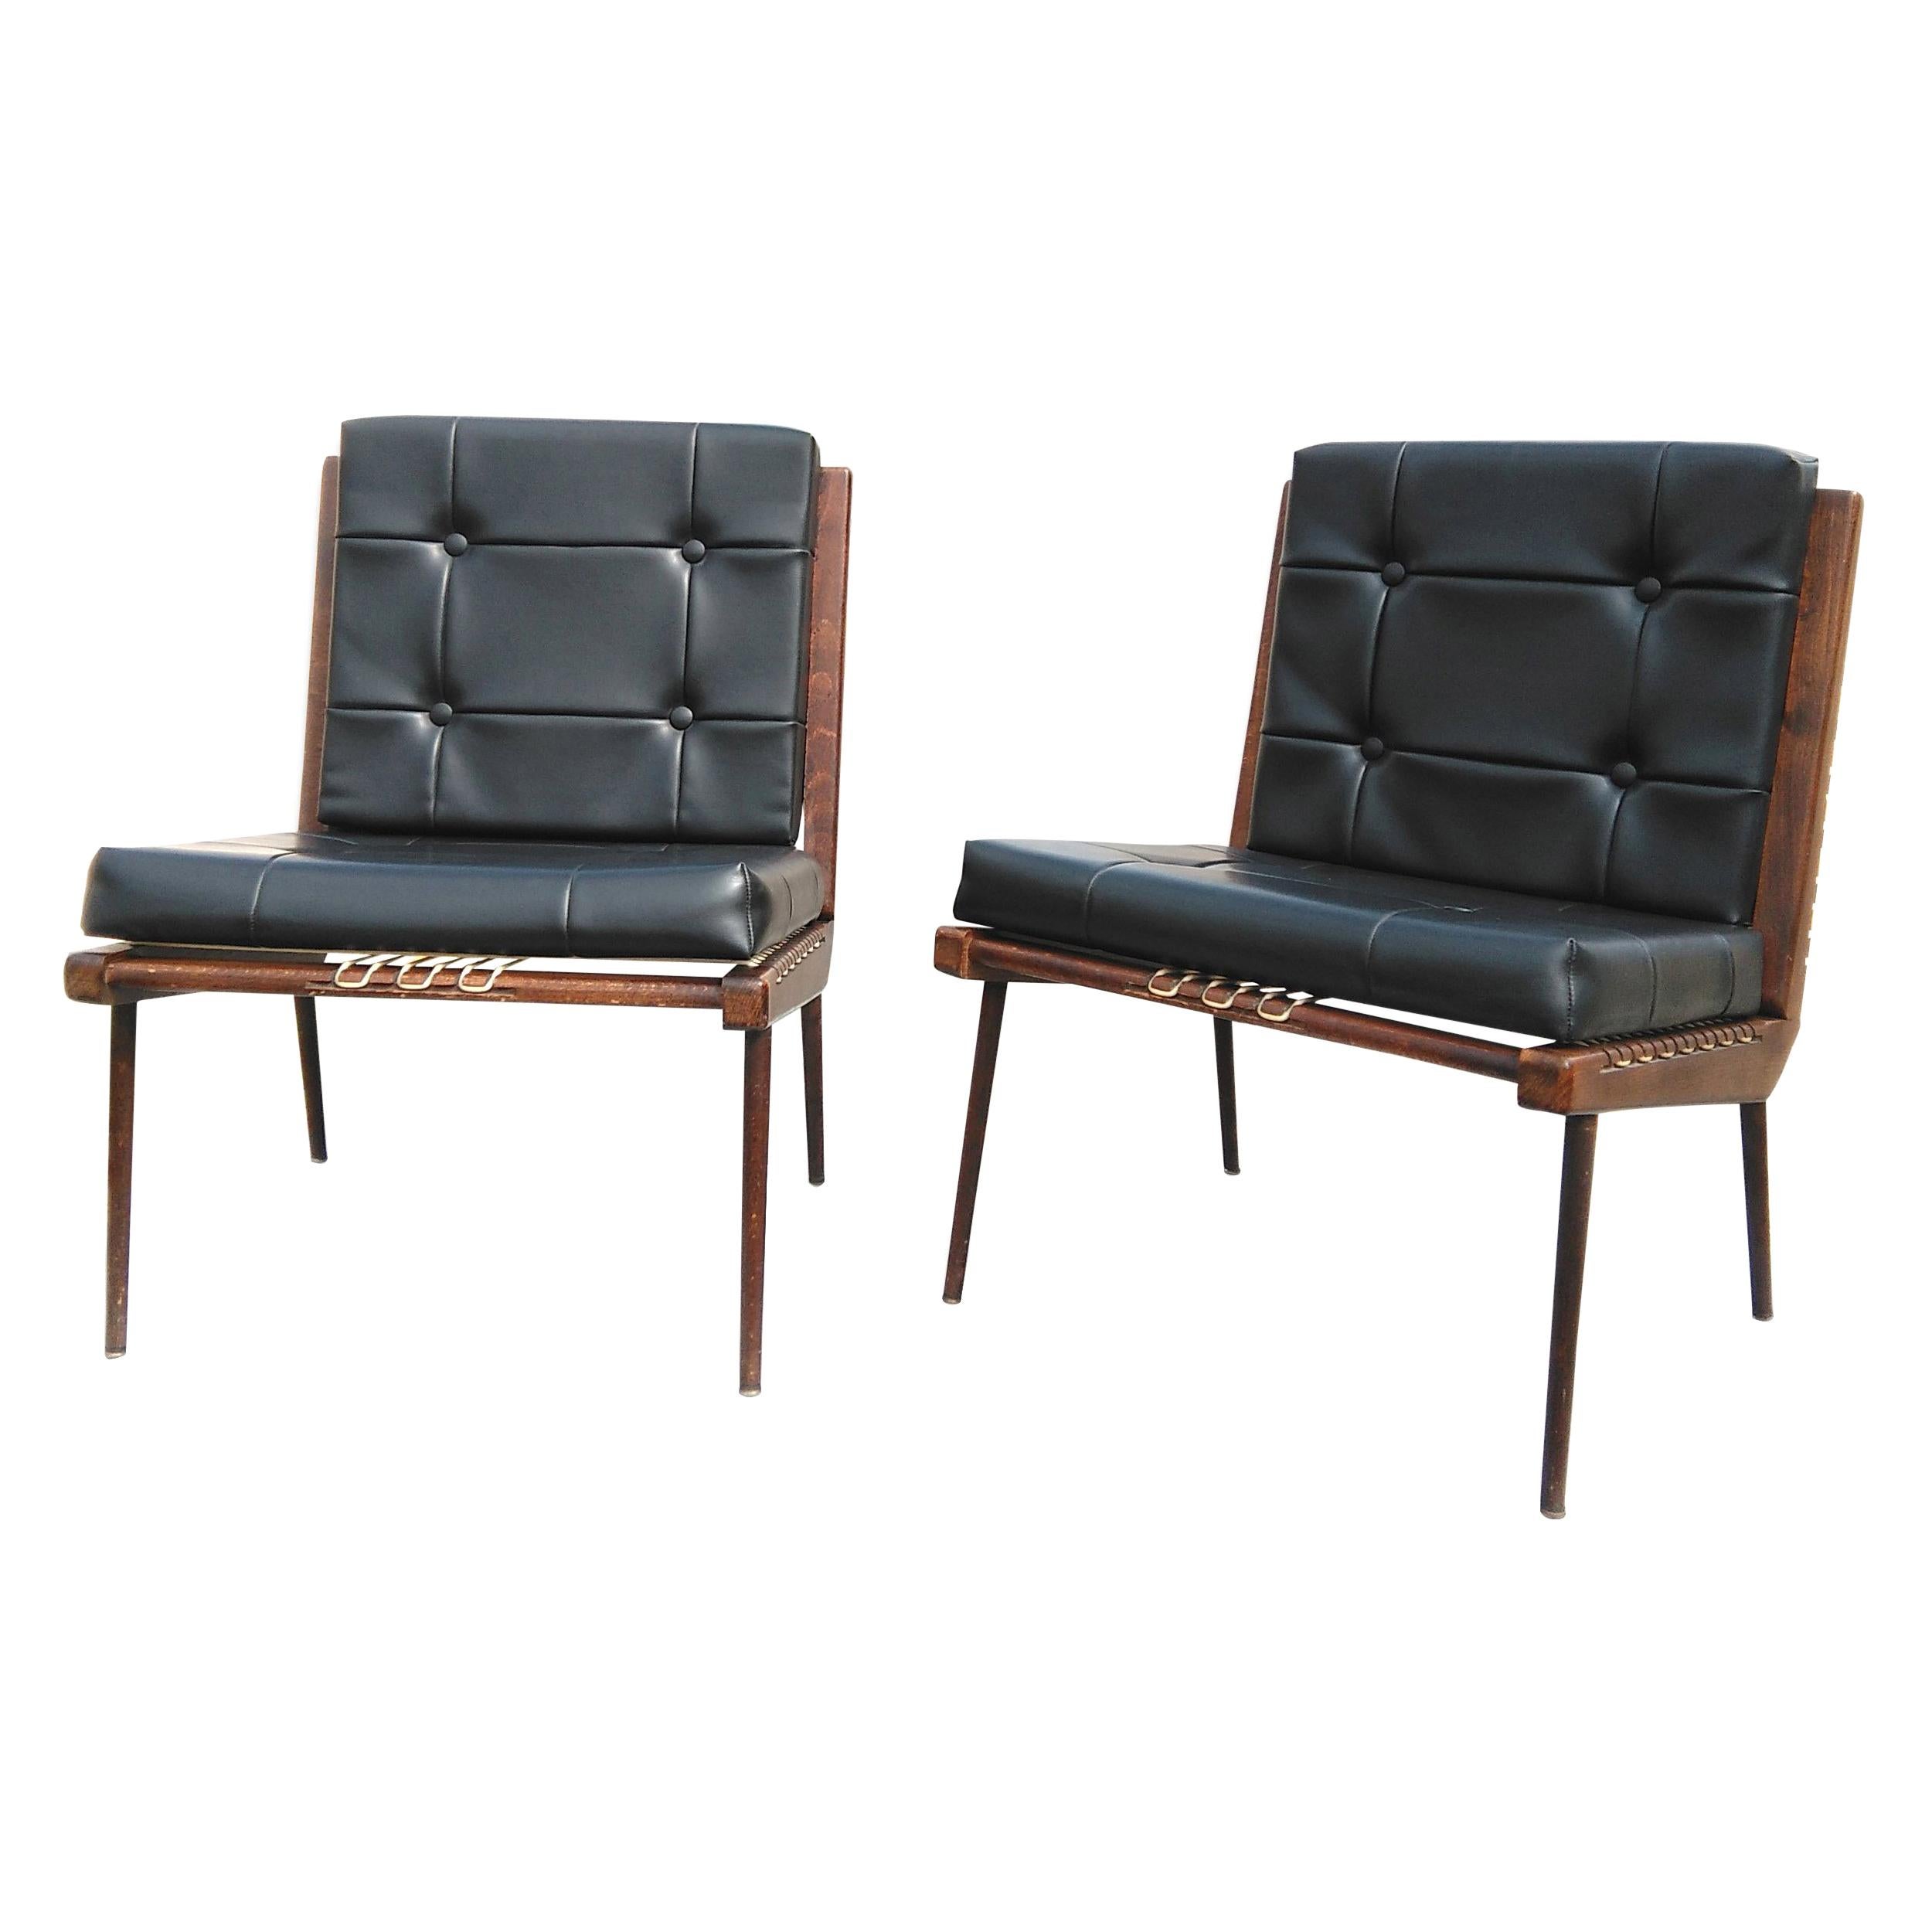 Georges Tigien Pair of Chairs, France, 1960s